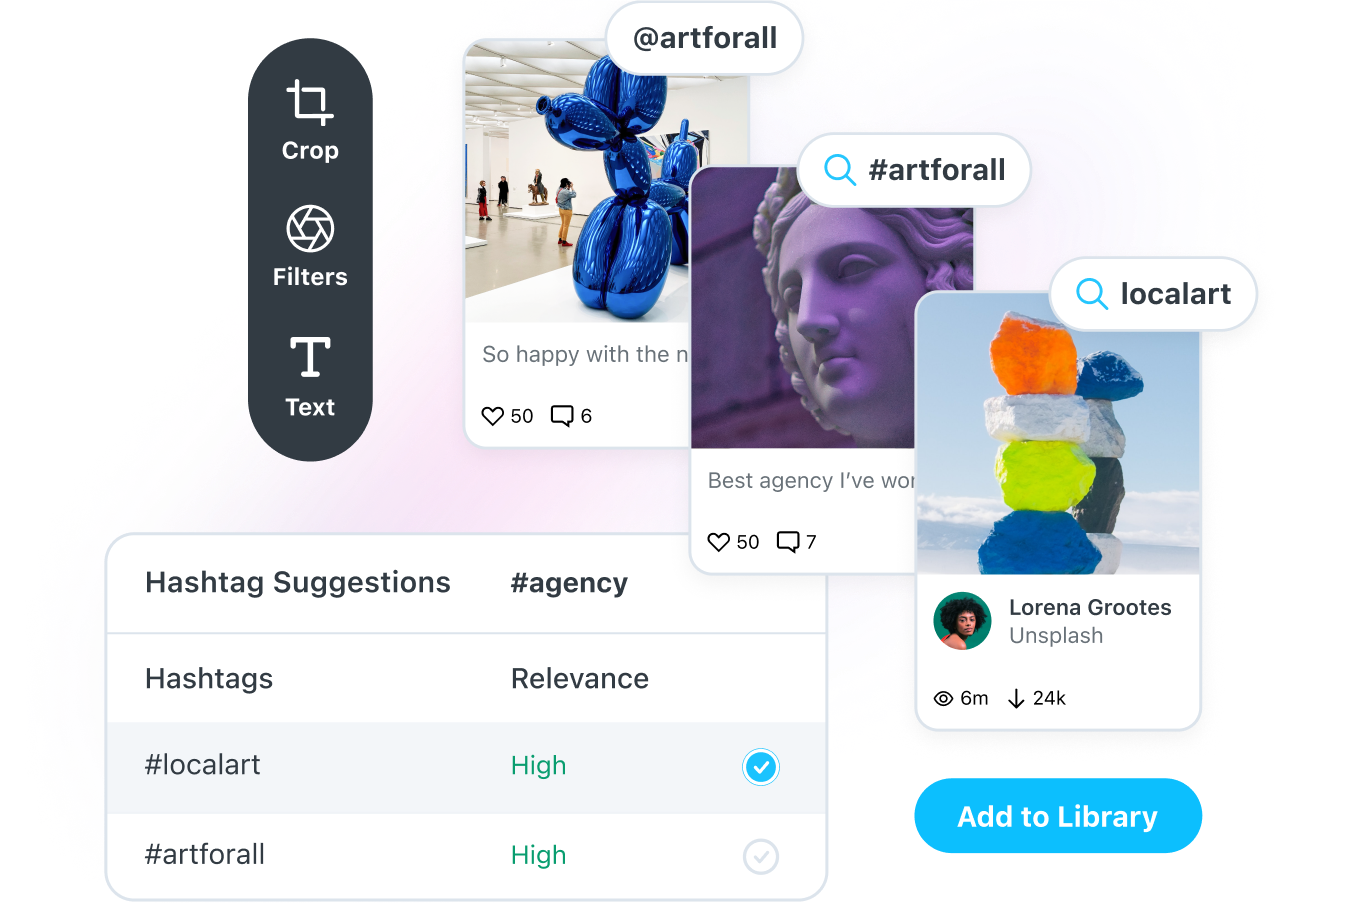 Hashtag Suggestions and UGC search tools available within the Later social media app